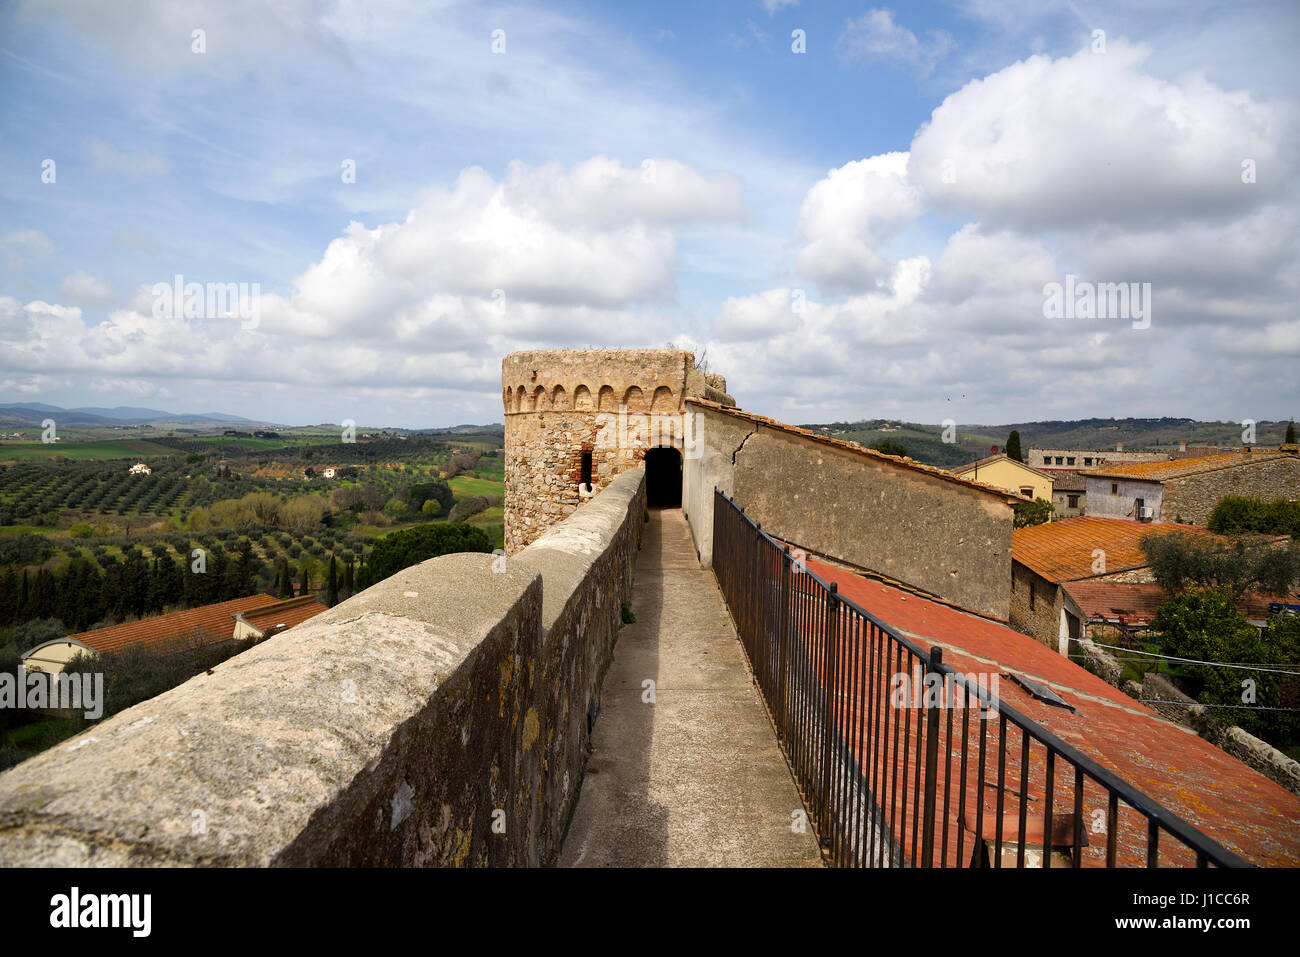 ancient walls and tower in Magliano, tuscany, italy Stock Photo